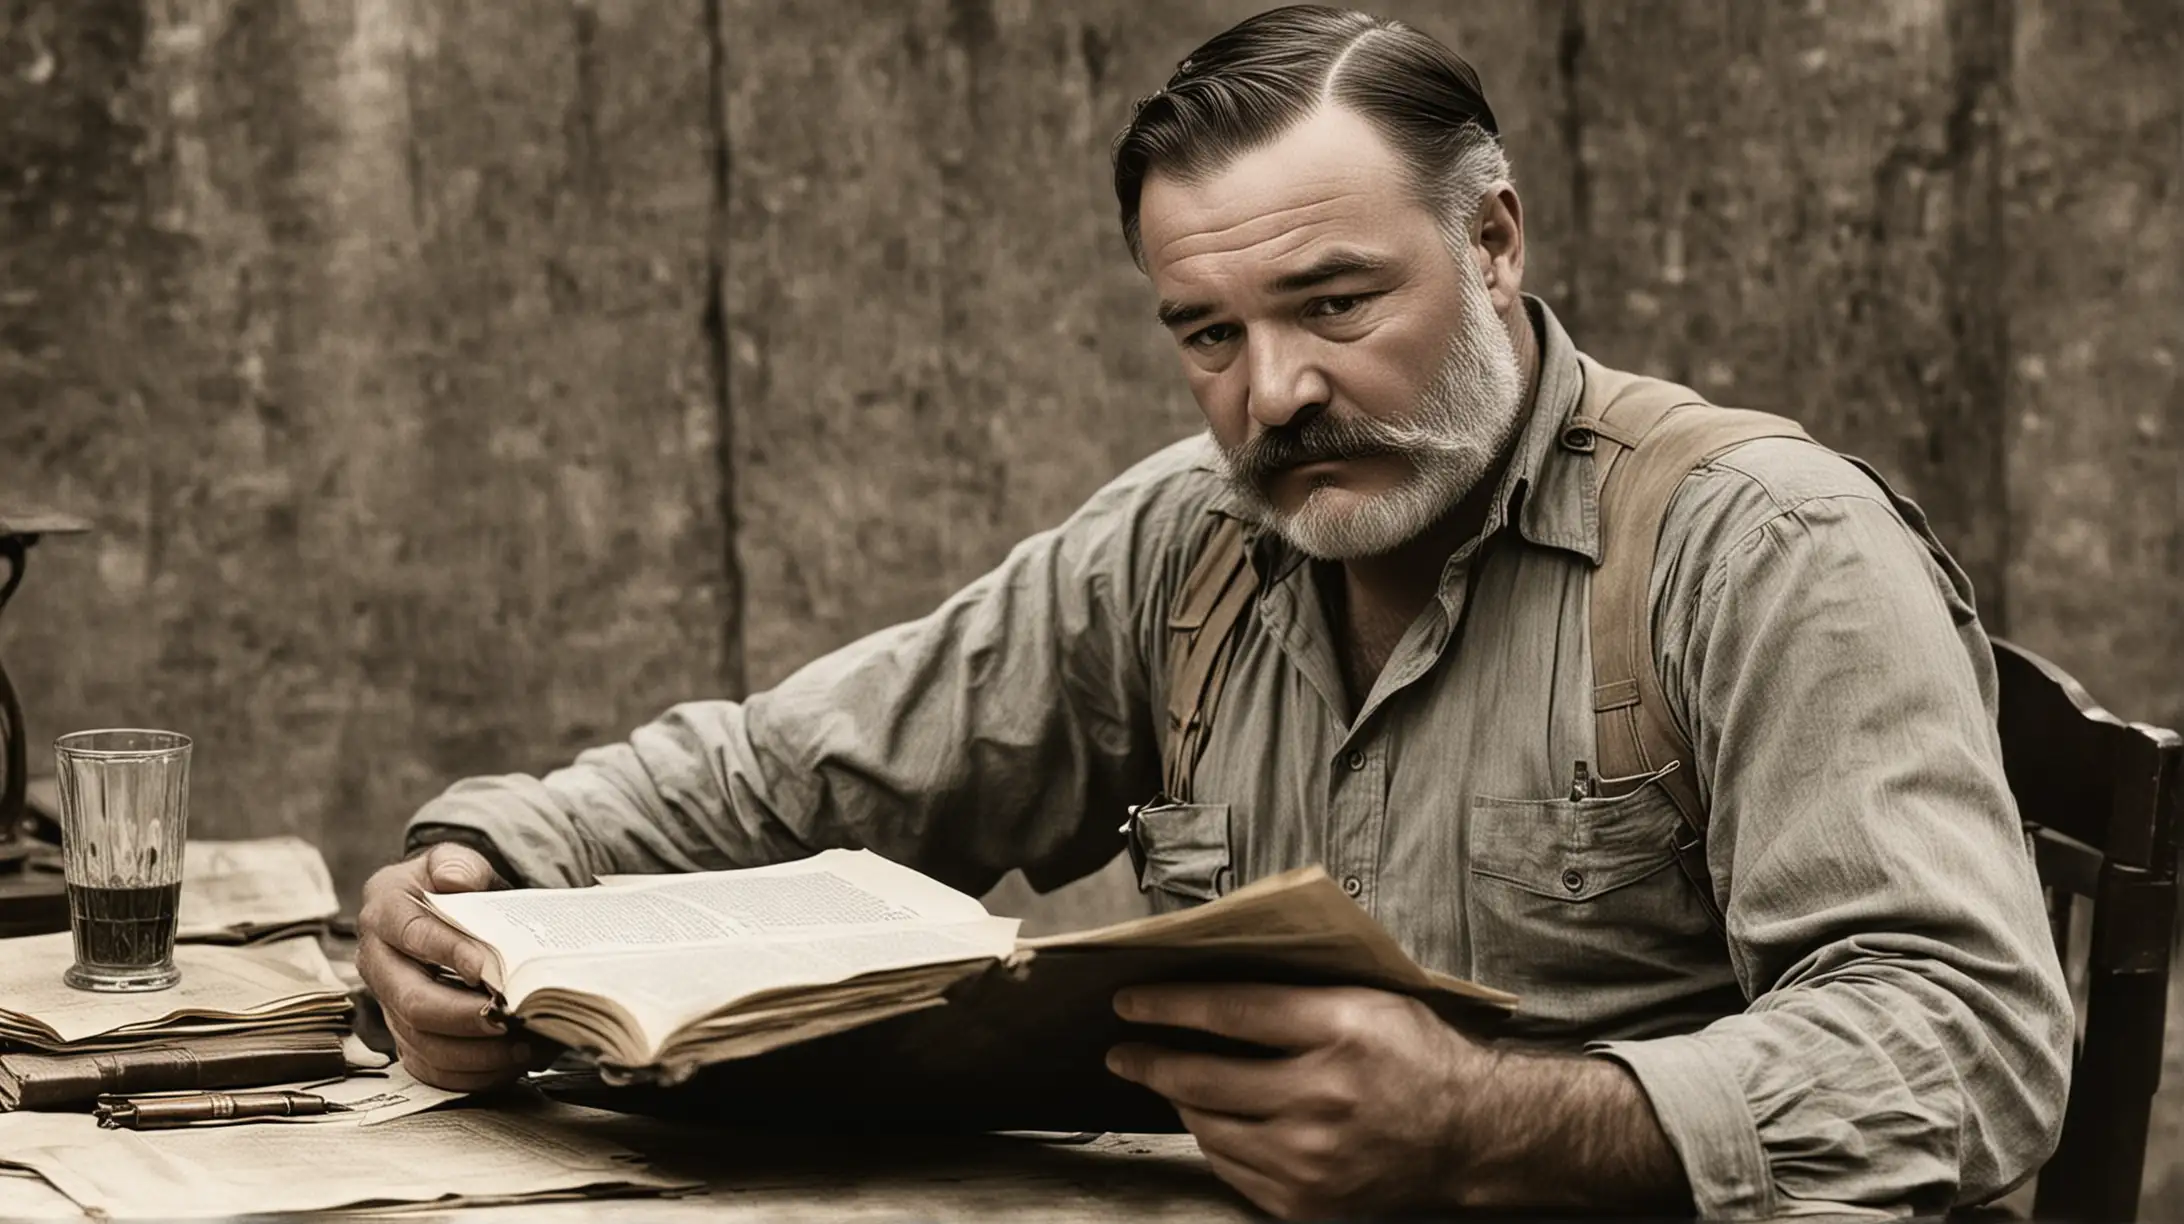 Year 1917. Ernest Hemingway 
reads a photo novel called "A Farewell to Arms". Styled like an old hand-colored silent film.